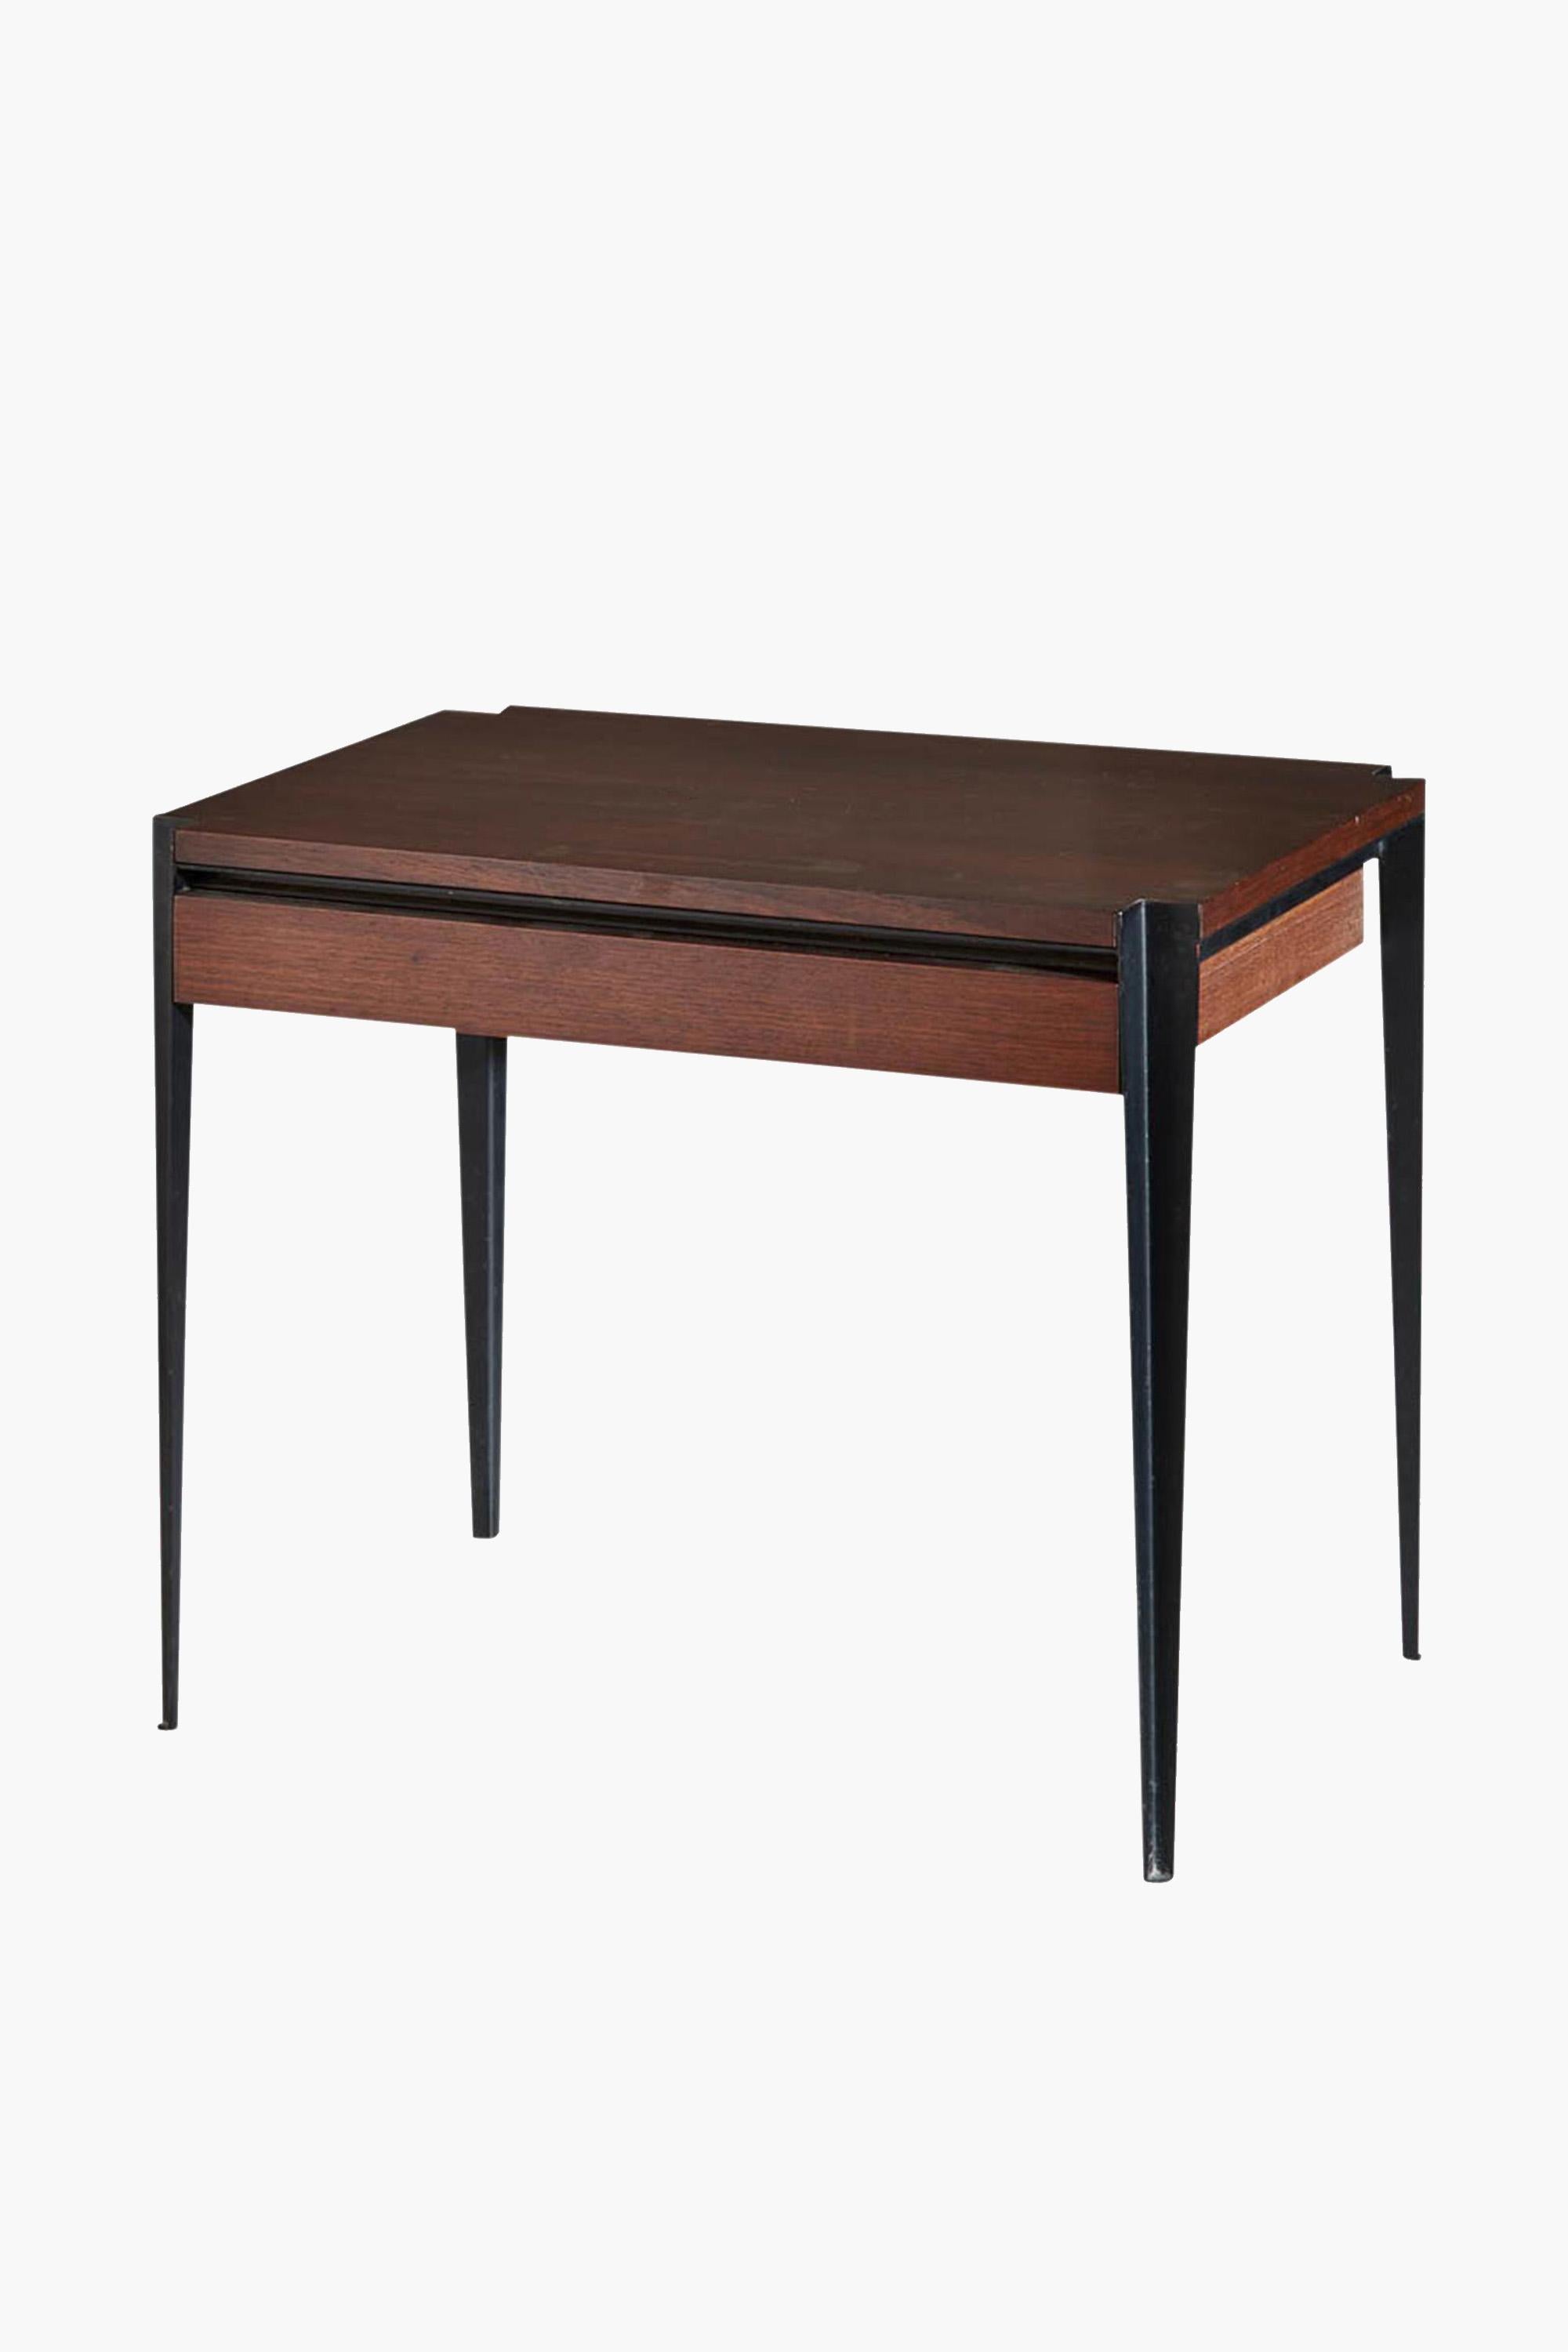 Model T61 table by Osvaldo Borsani for Tecno, 1960s

A 1960s Model T61 coffee or side table designed by Osvaldo Borsani with a single drawer.

Made in teak with a black painted metal frame. Good vintage condition.

Ref. G. Bosoni, Tecno The Discreet